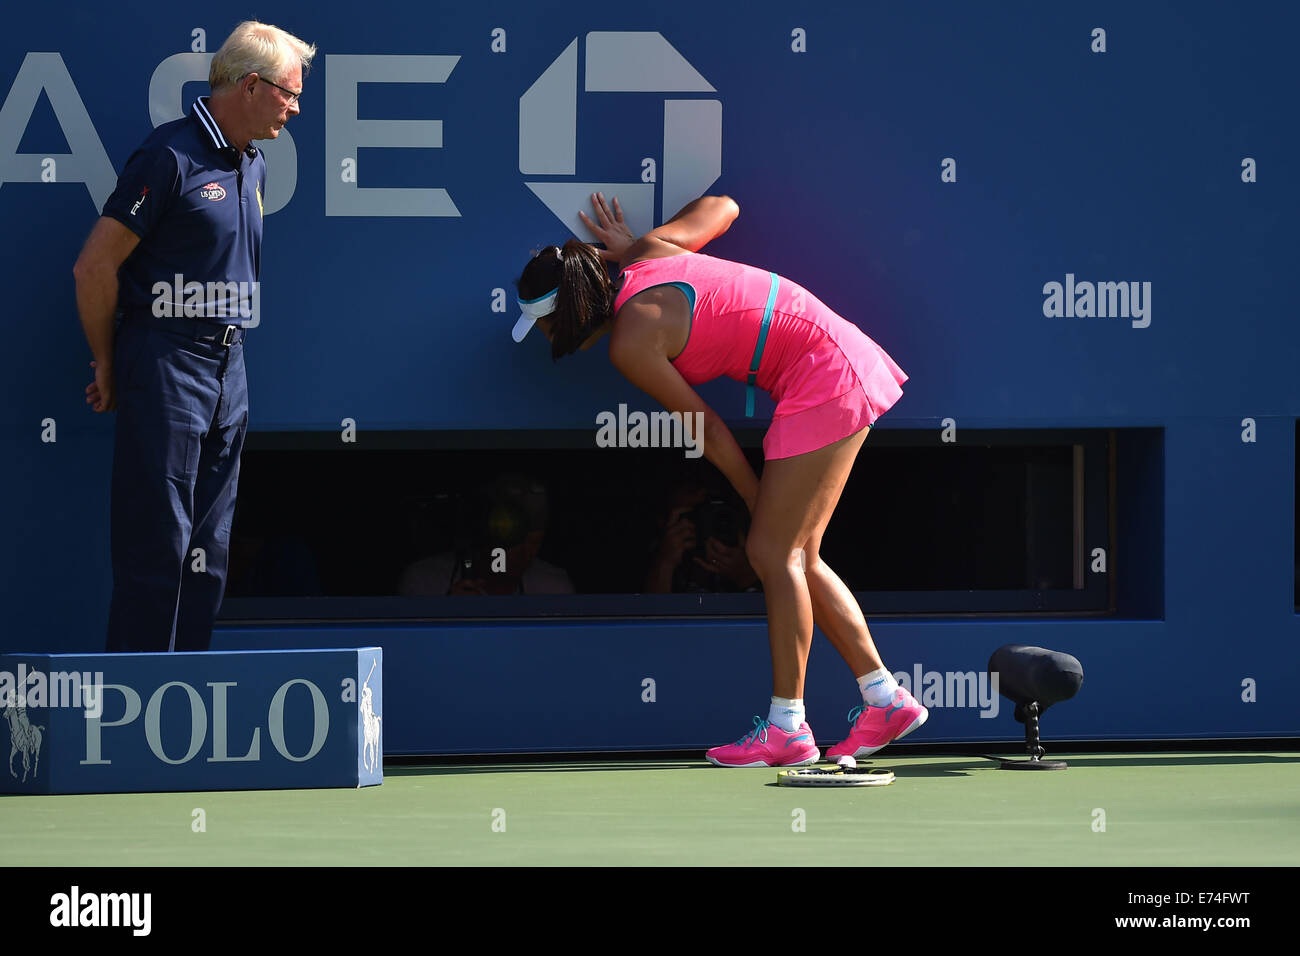 Flushing Meadows, New York, USA. 05th Sep, 2014. Shuai Peng (CHN) gets cramps at US Open 2014, pumps her fist as she plays Wozniacki in the 1st womens semi-final. Wozniacki won in 2 sets as Peng retired injured © Action Plus Sports/Alamy Live News Stock Photo